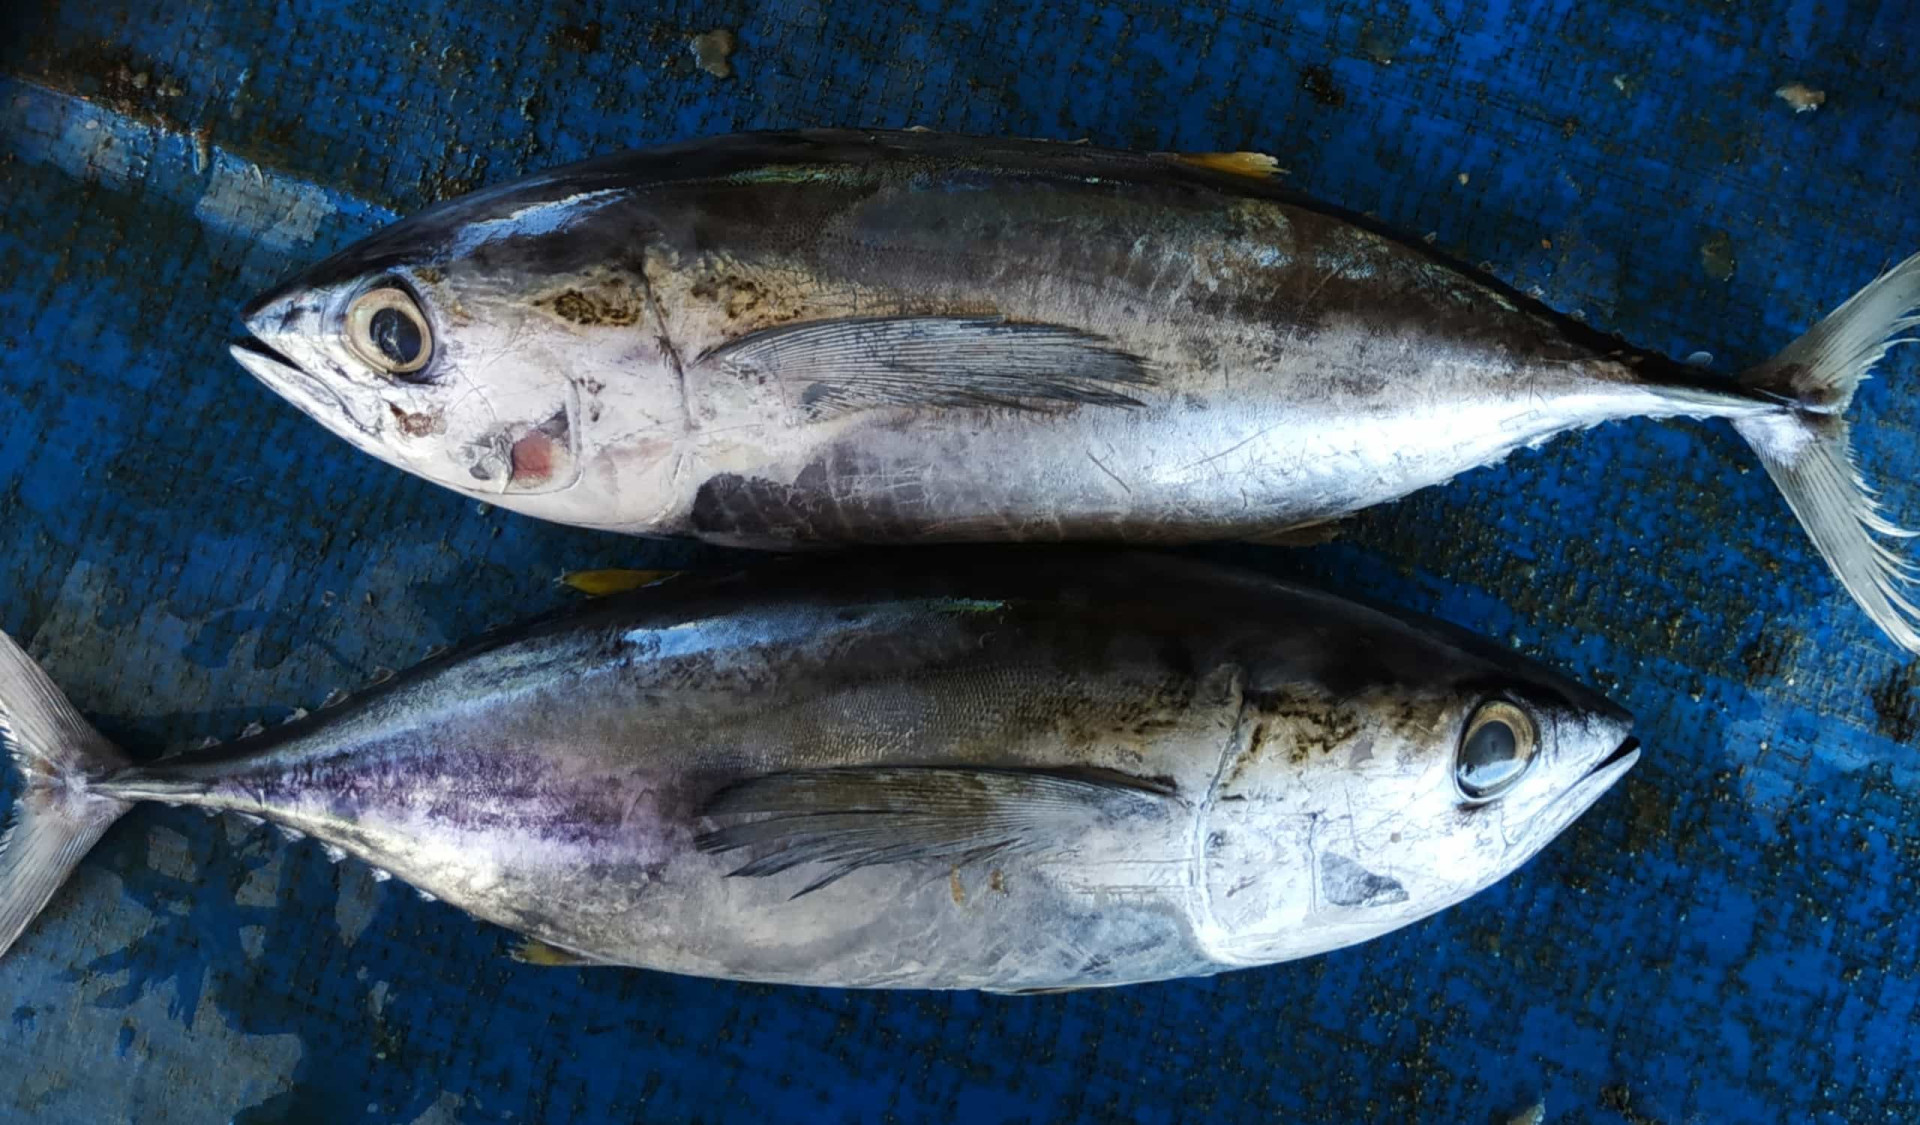 <p>According to the Environmental Defense Fund, bigger species like bigeye and albacore have higher levels of mercury than light and skipjack tuna.</p><p>You may also like:<a href="https://www.starsinsider.com/n/345149?utm_source=msn.com&utm_medium=display&utm_campaign=referral_description&utm_content=578219en-en"> Weird things that happen to your body when you die</a></p>